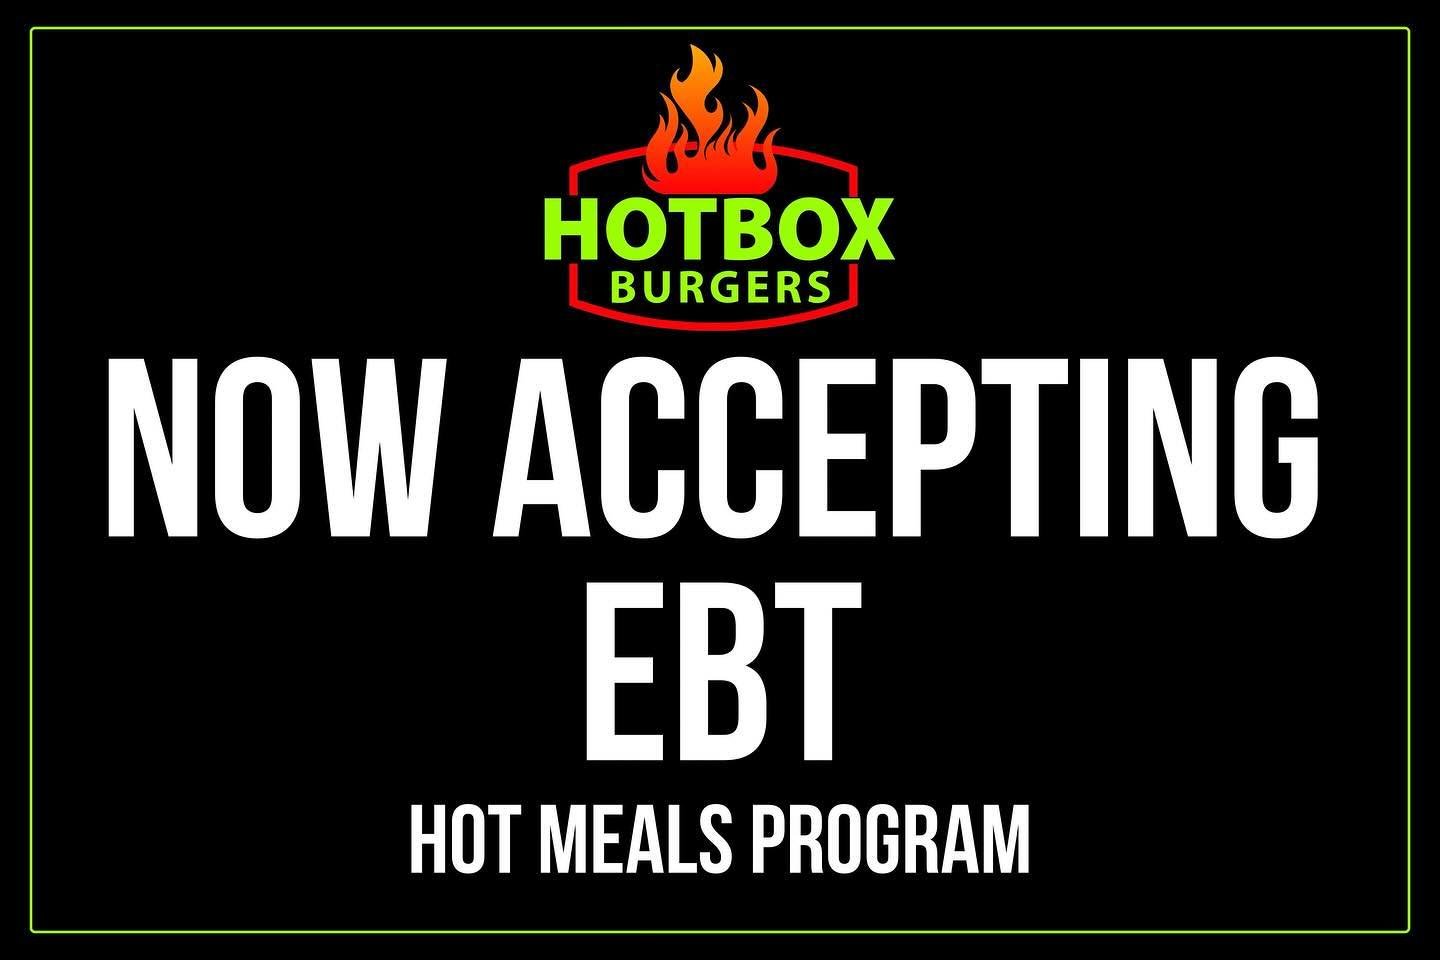 We are open Monday -Friday 10am-8pm, Saturday 10am-7pm, Closed Sunday. We accept EBT ( hot meals program)